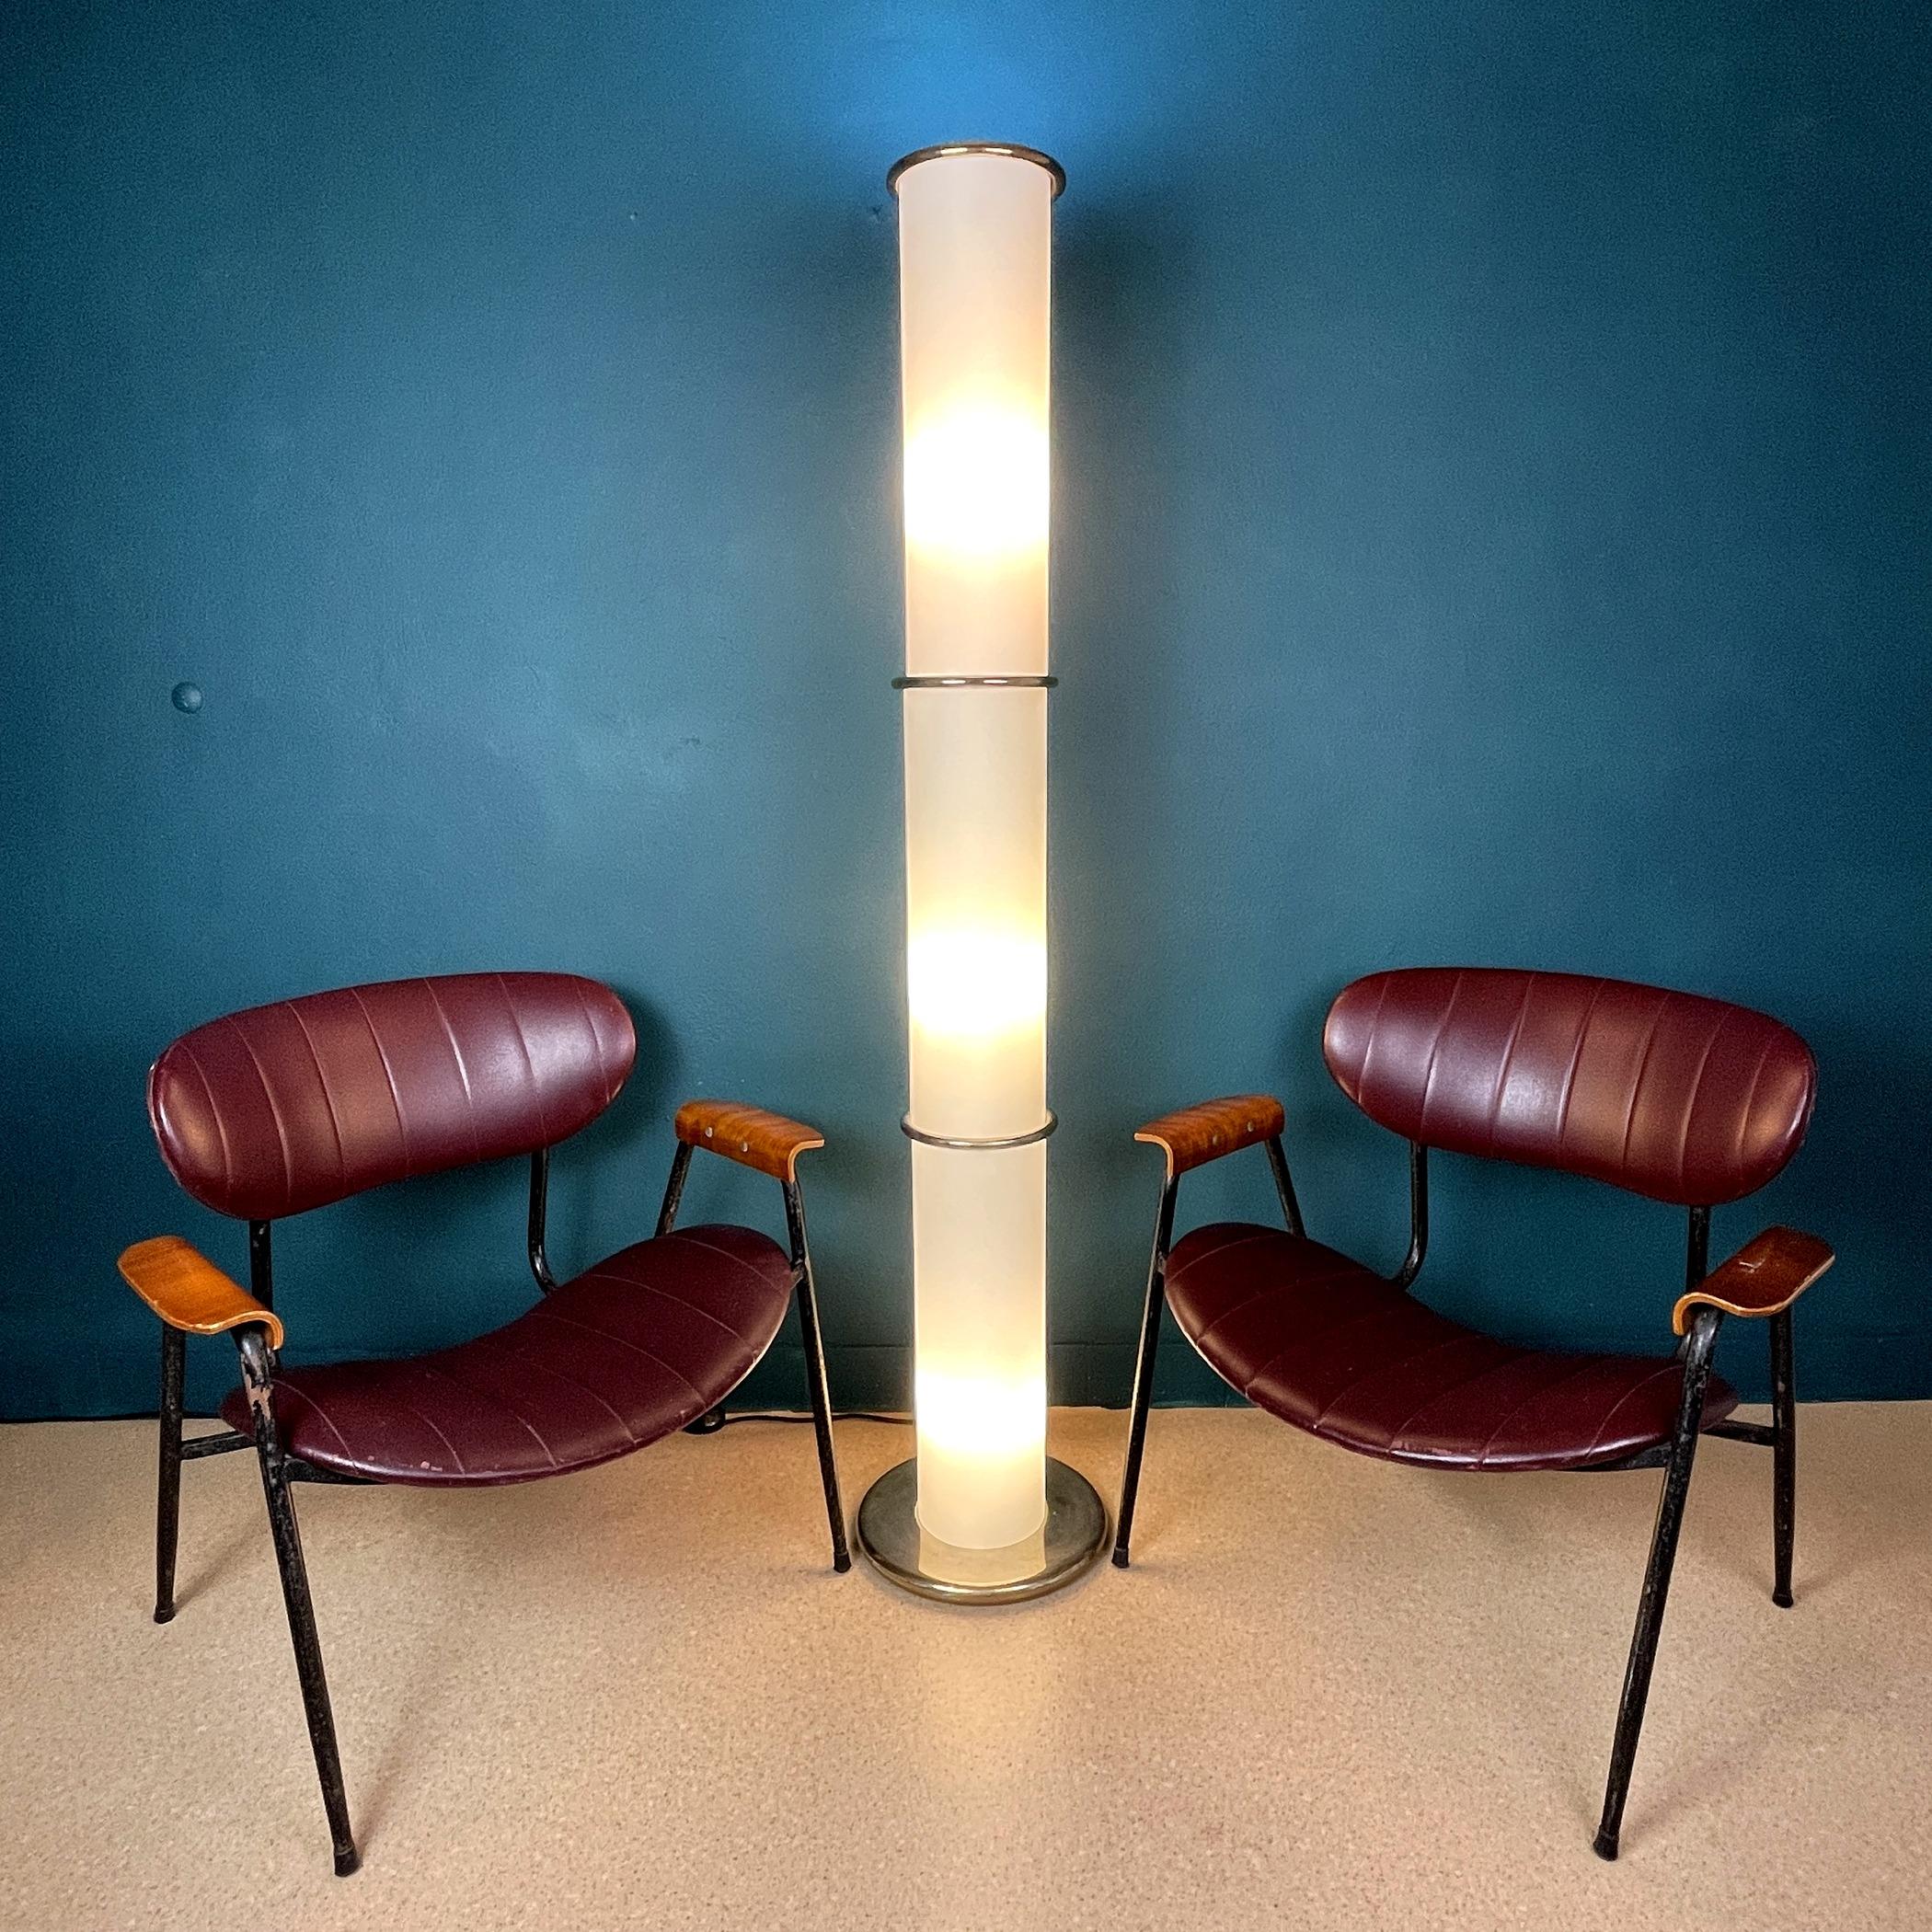 Mid-century white opaline glass floor lamp made in Italy in the 1970s. This gorgeous vintage floor lamp is made up of three cones. Lighting works in three modes: top light only, bottom three bulbs, all four bulbs together. Milky glass creates a